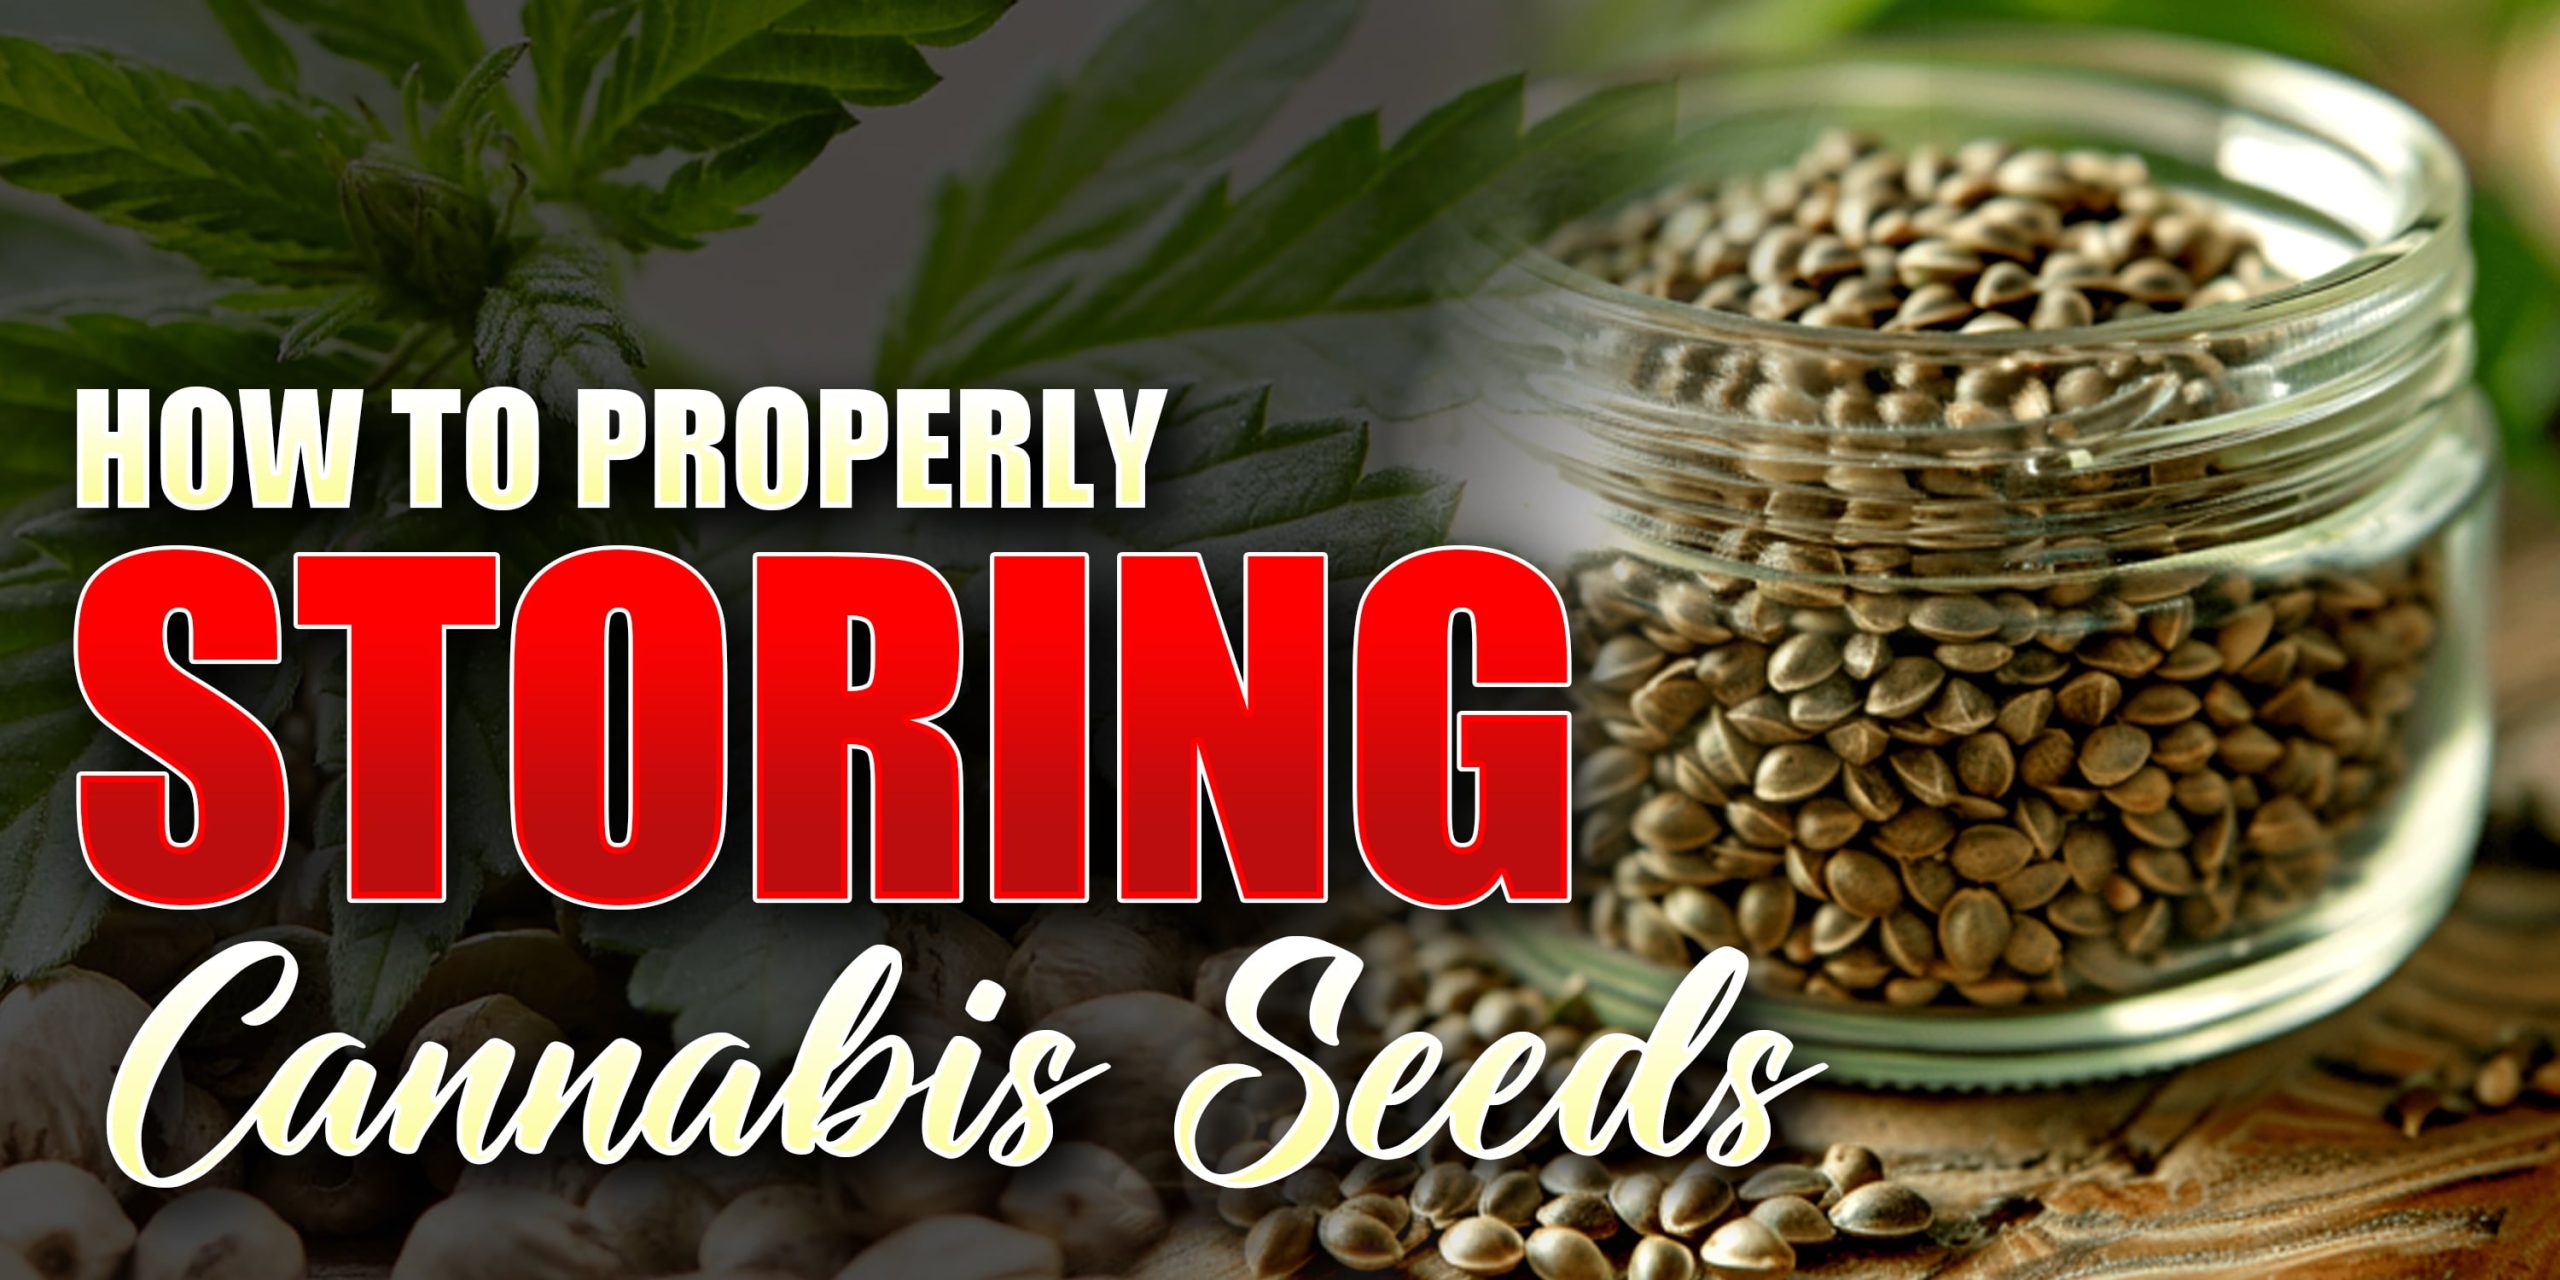 How To Properly Storing Cannabis Seeds Min Scaled, Crop King Seeds